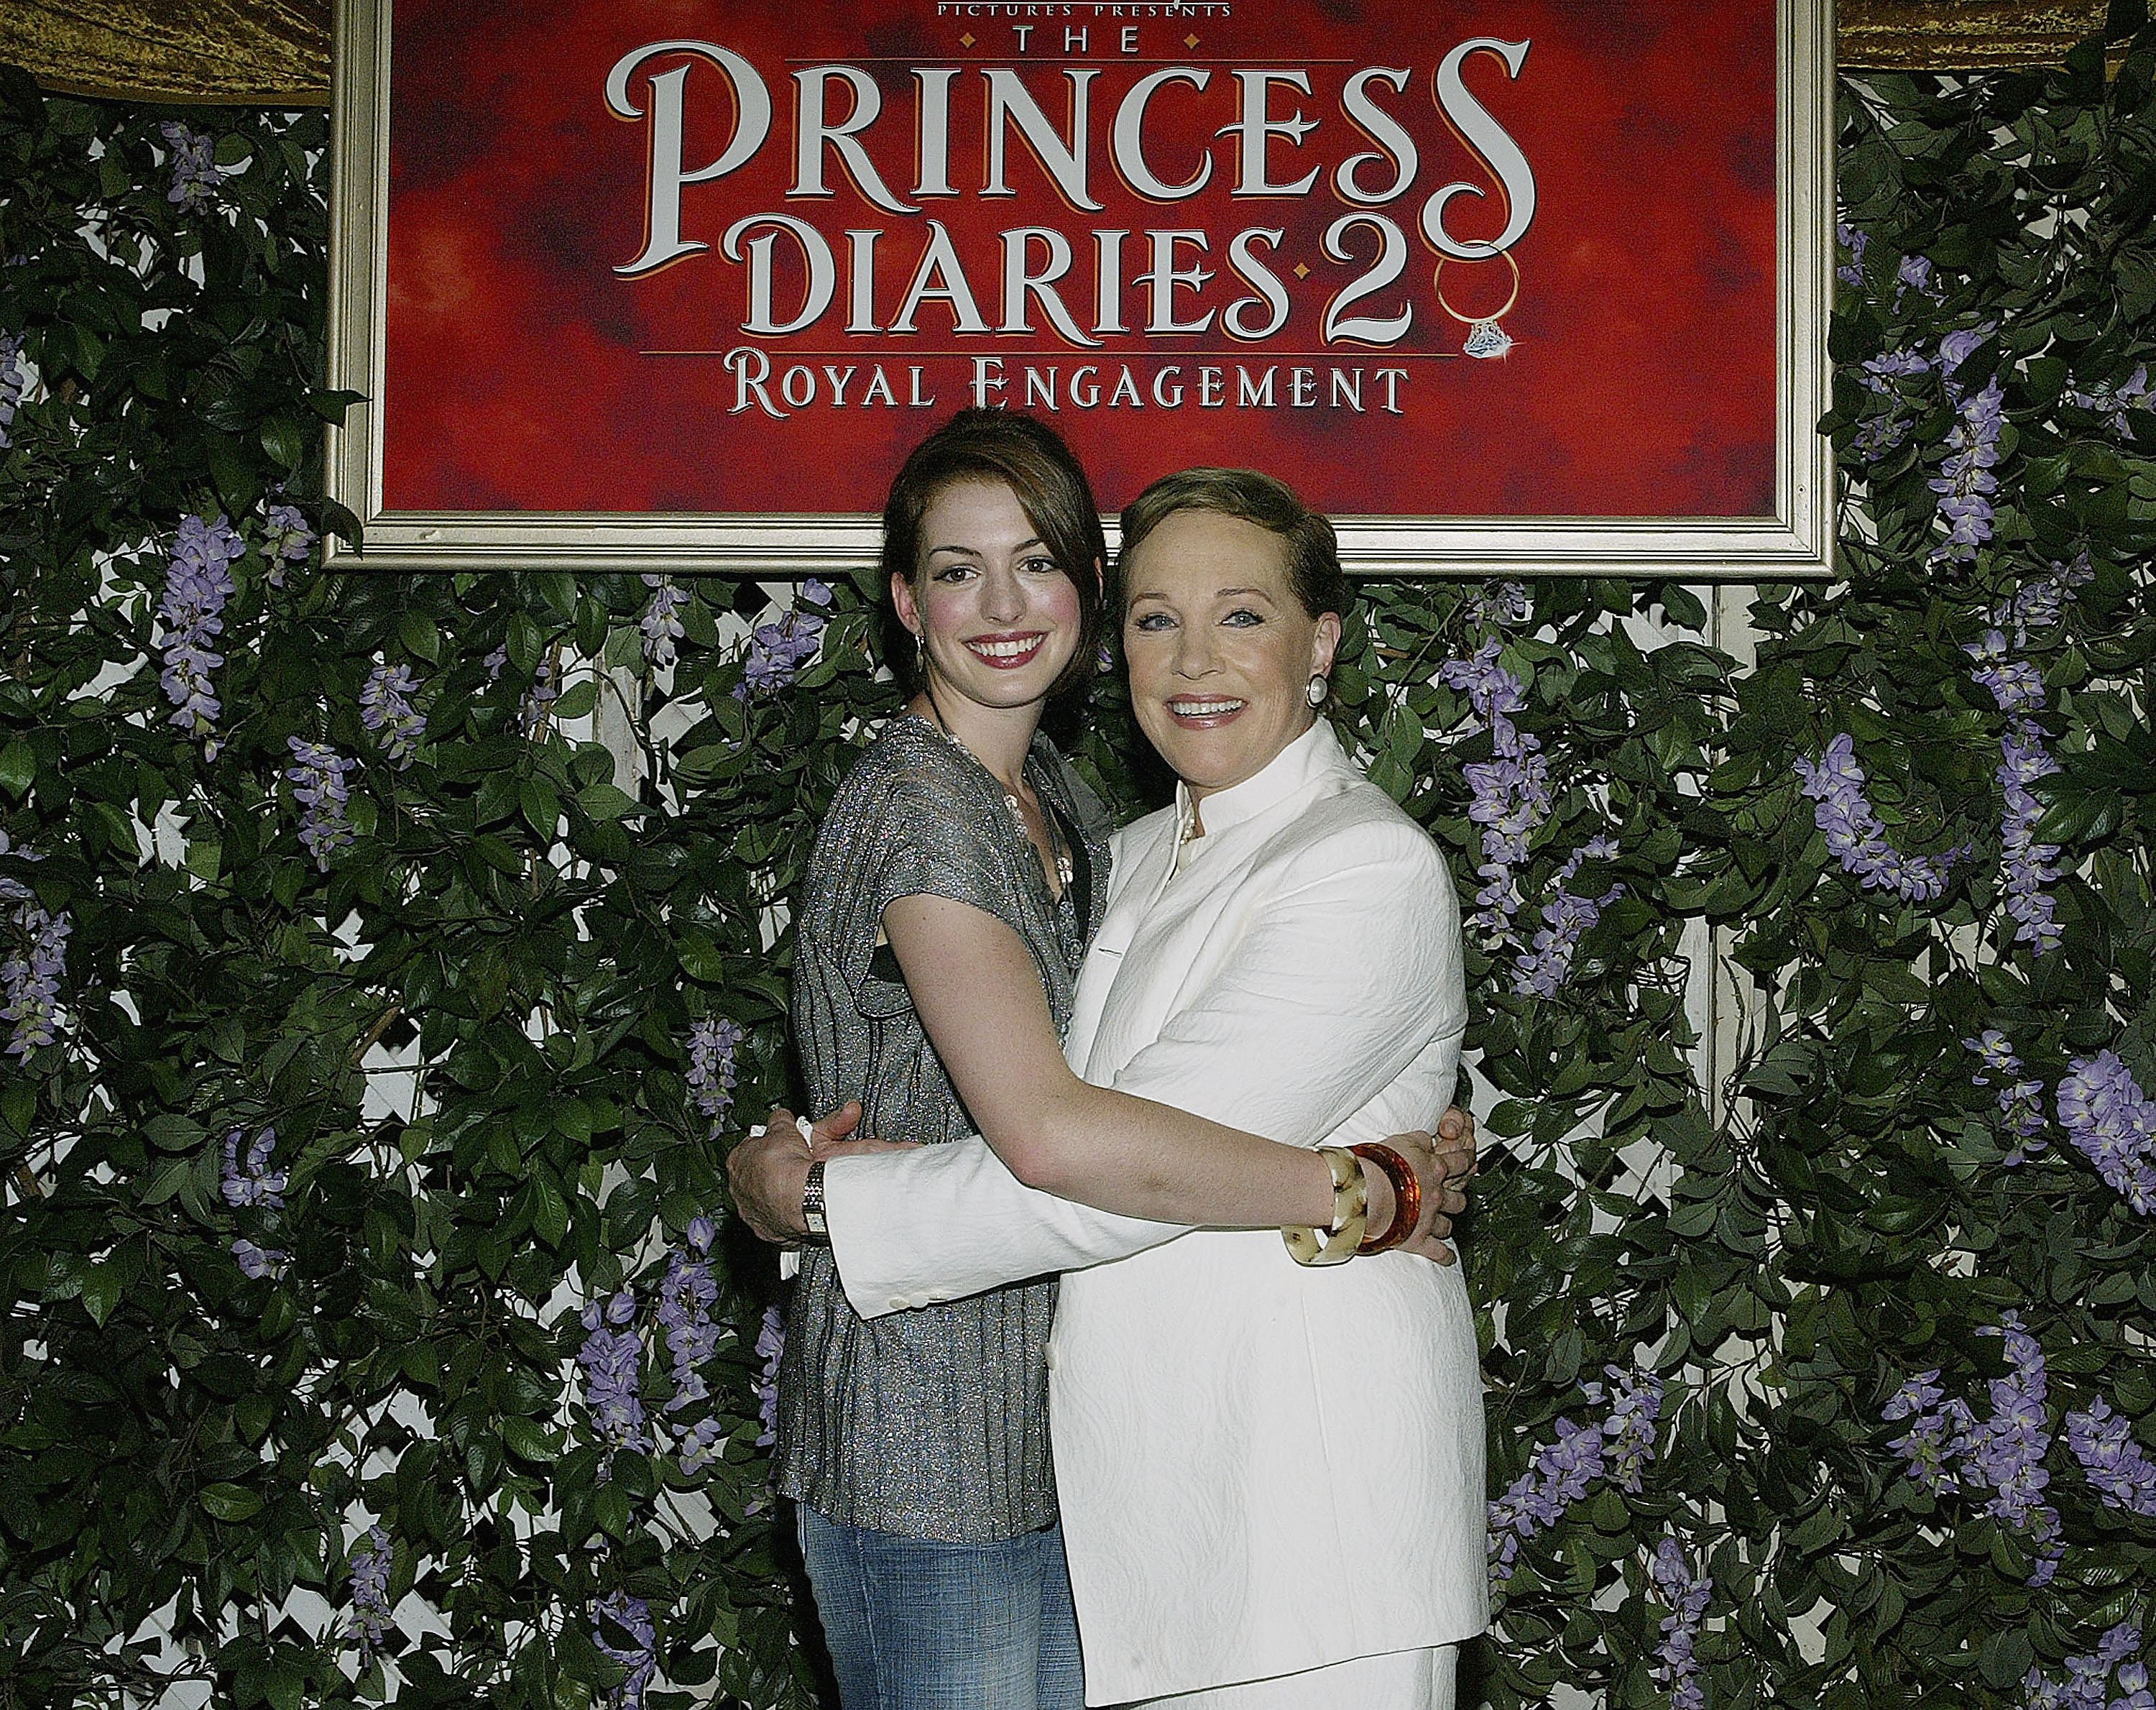 Anne Hathaway and Julie Andrews attend an event for Princess Diaries 2 in 2004.